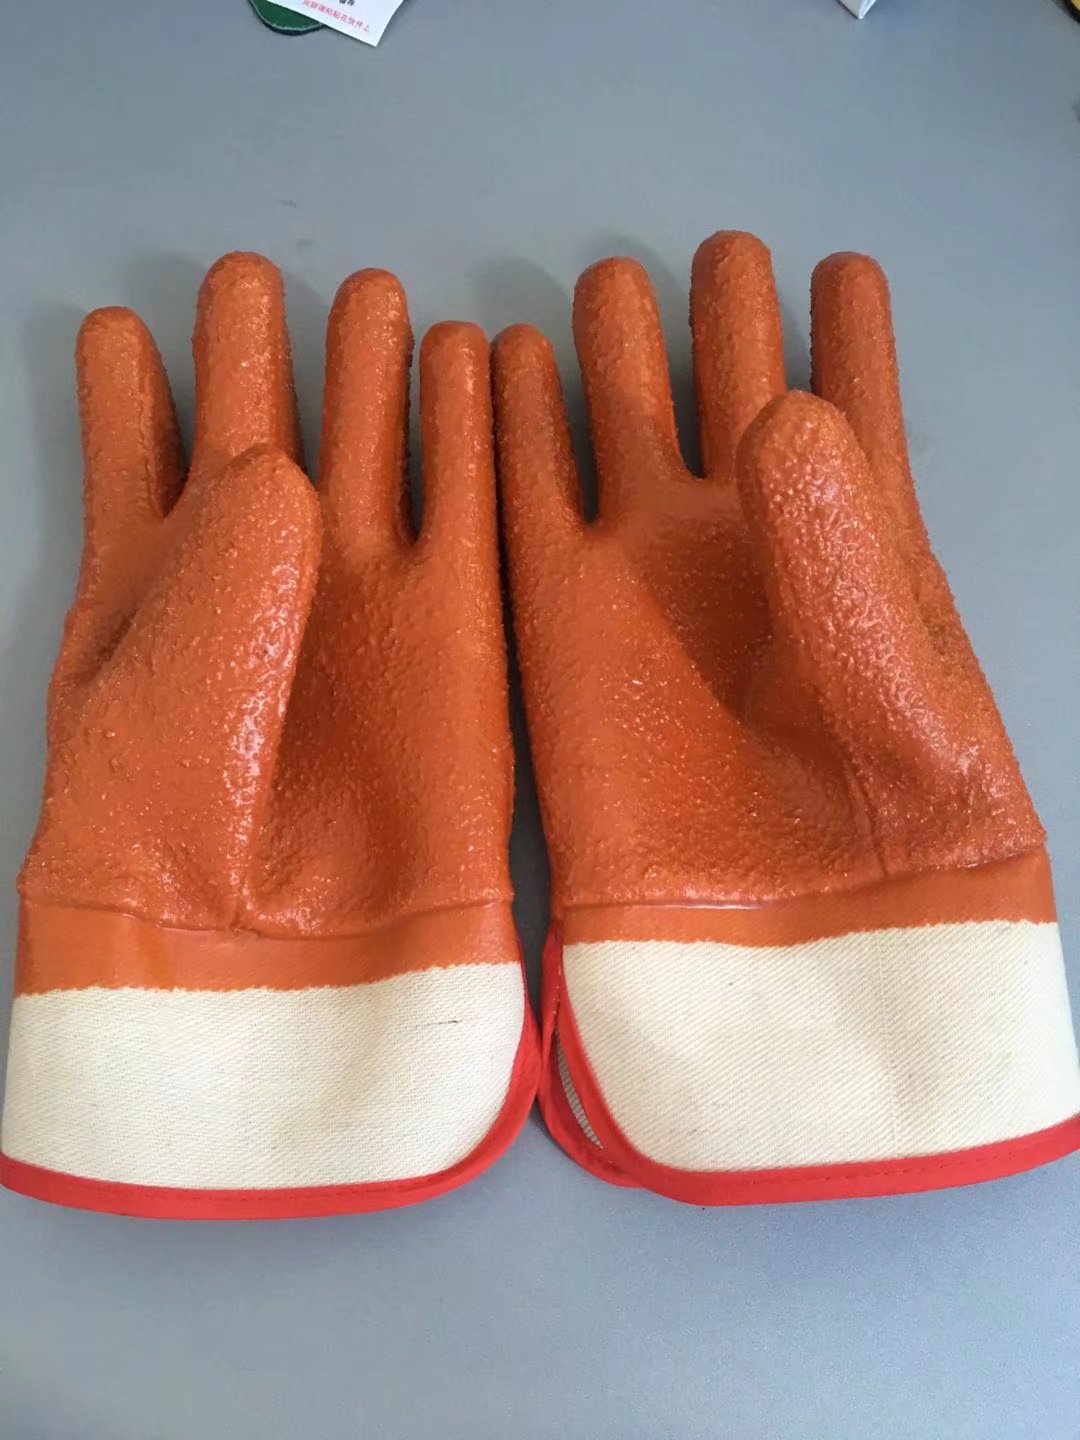 Safety Cuff Cotton Interlock Liner PVC With Granule Coated Work Glove